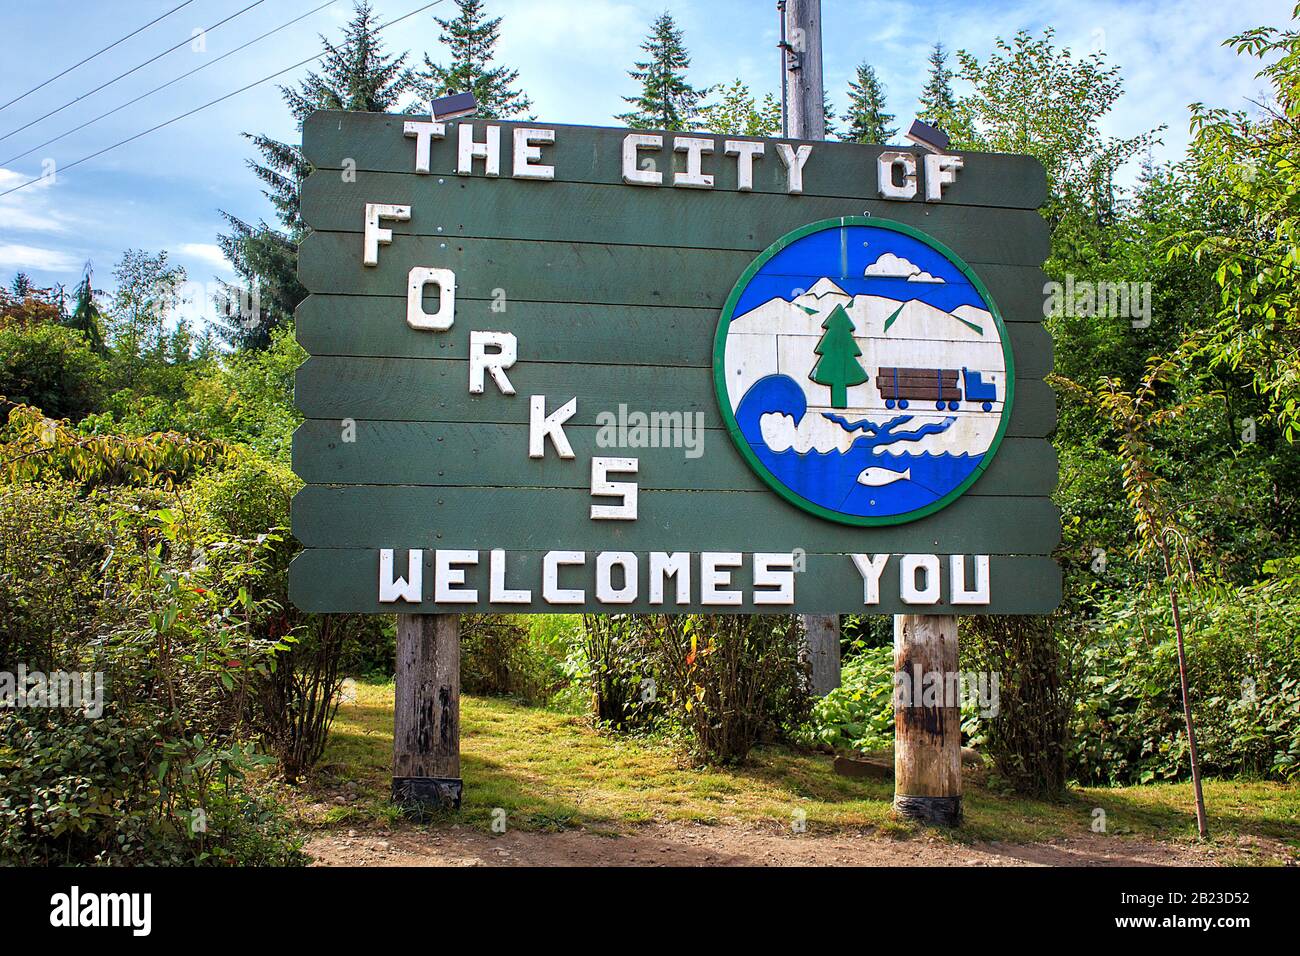 Forks, Washington/USA - 08 21 2011: City sign. The city is famous for the Twilight book/movie series by Stephenie Meyer that is set in Forks Stock Photo